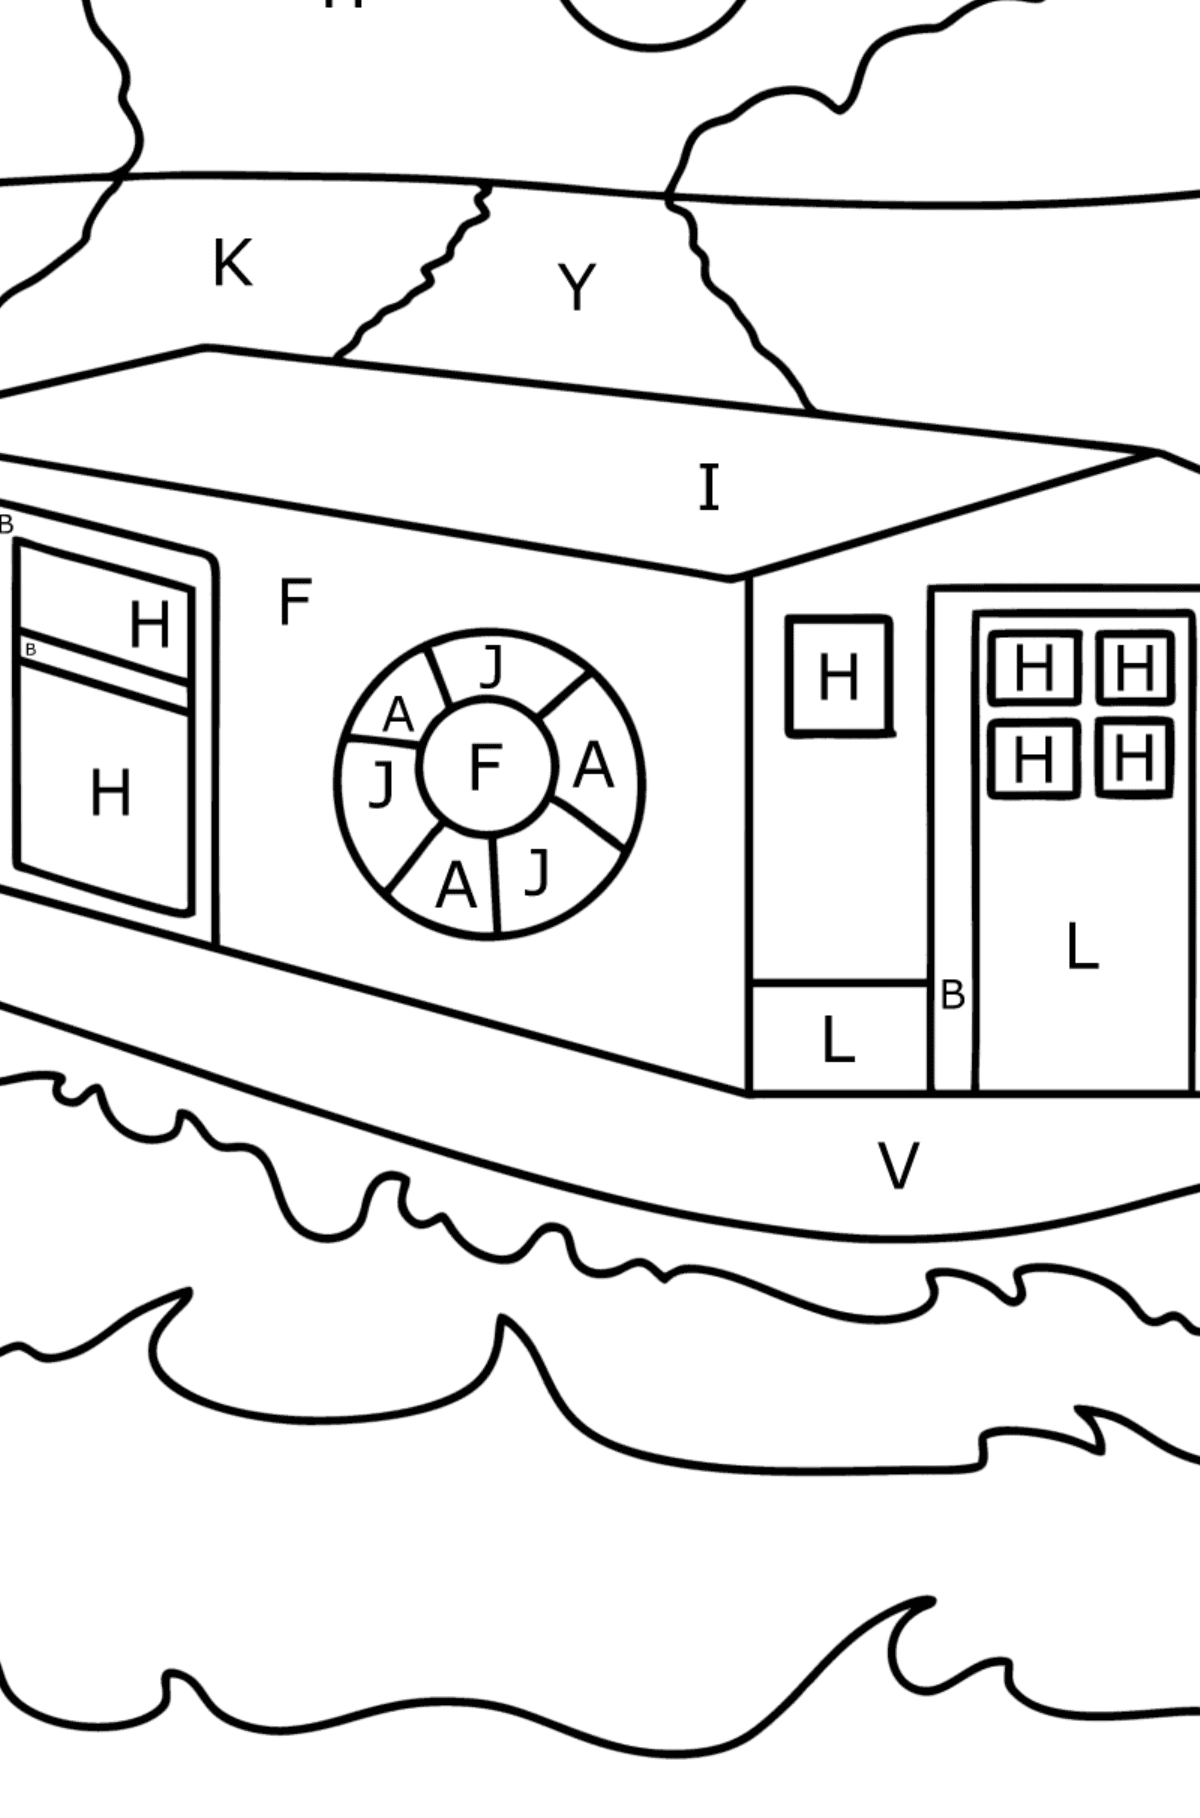 BoatHouse coloring page - Coloring by Letters for Kids